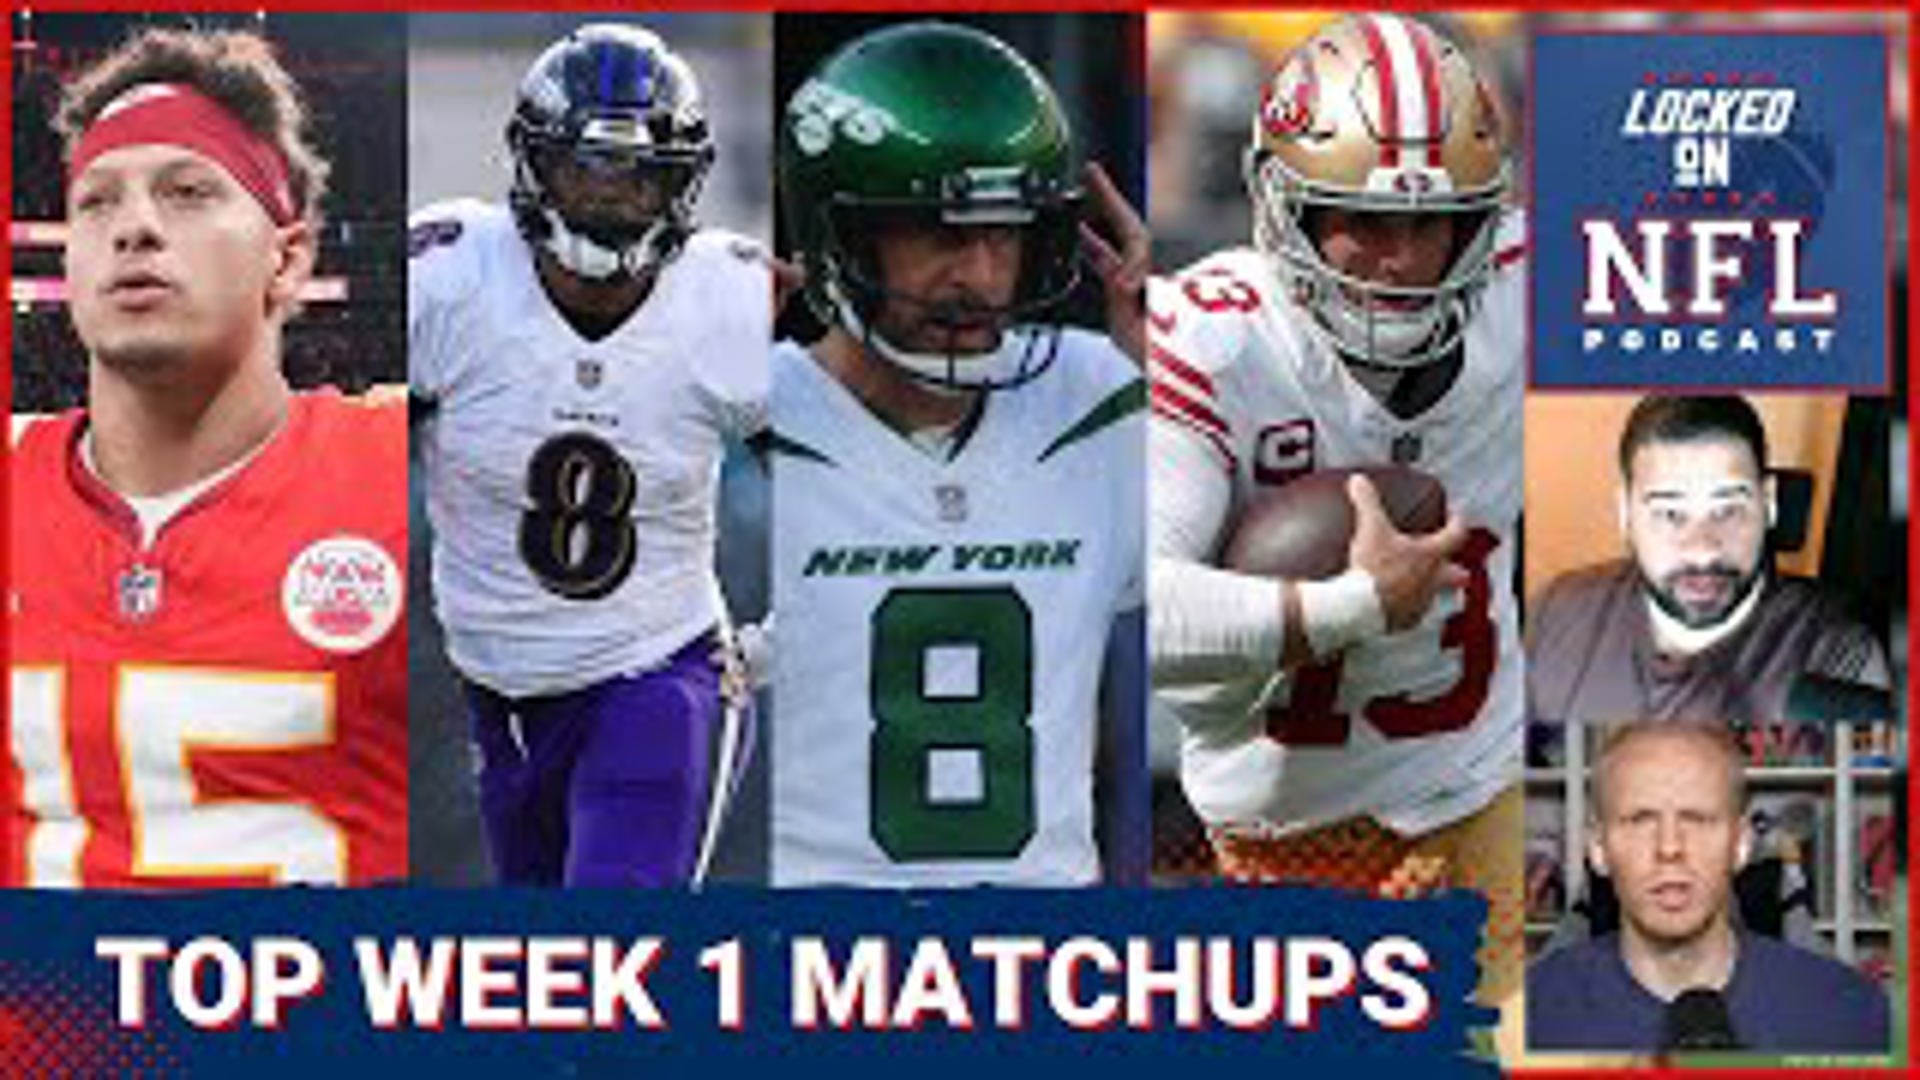 NFL Schedule Release Preview Top Week 1 Matchups Chiefs vs Ravens